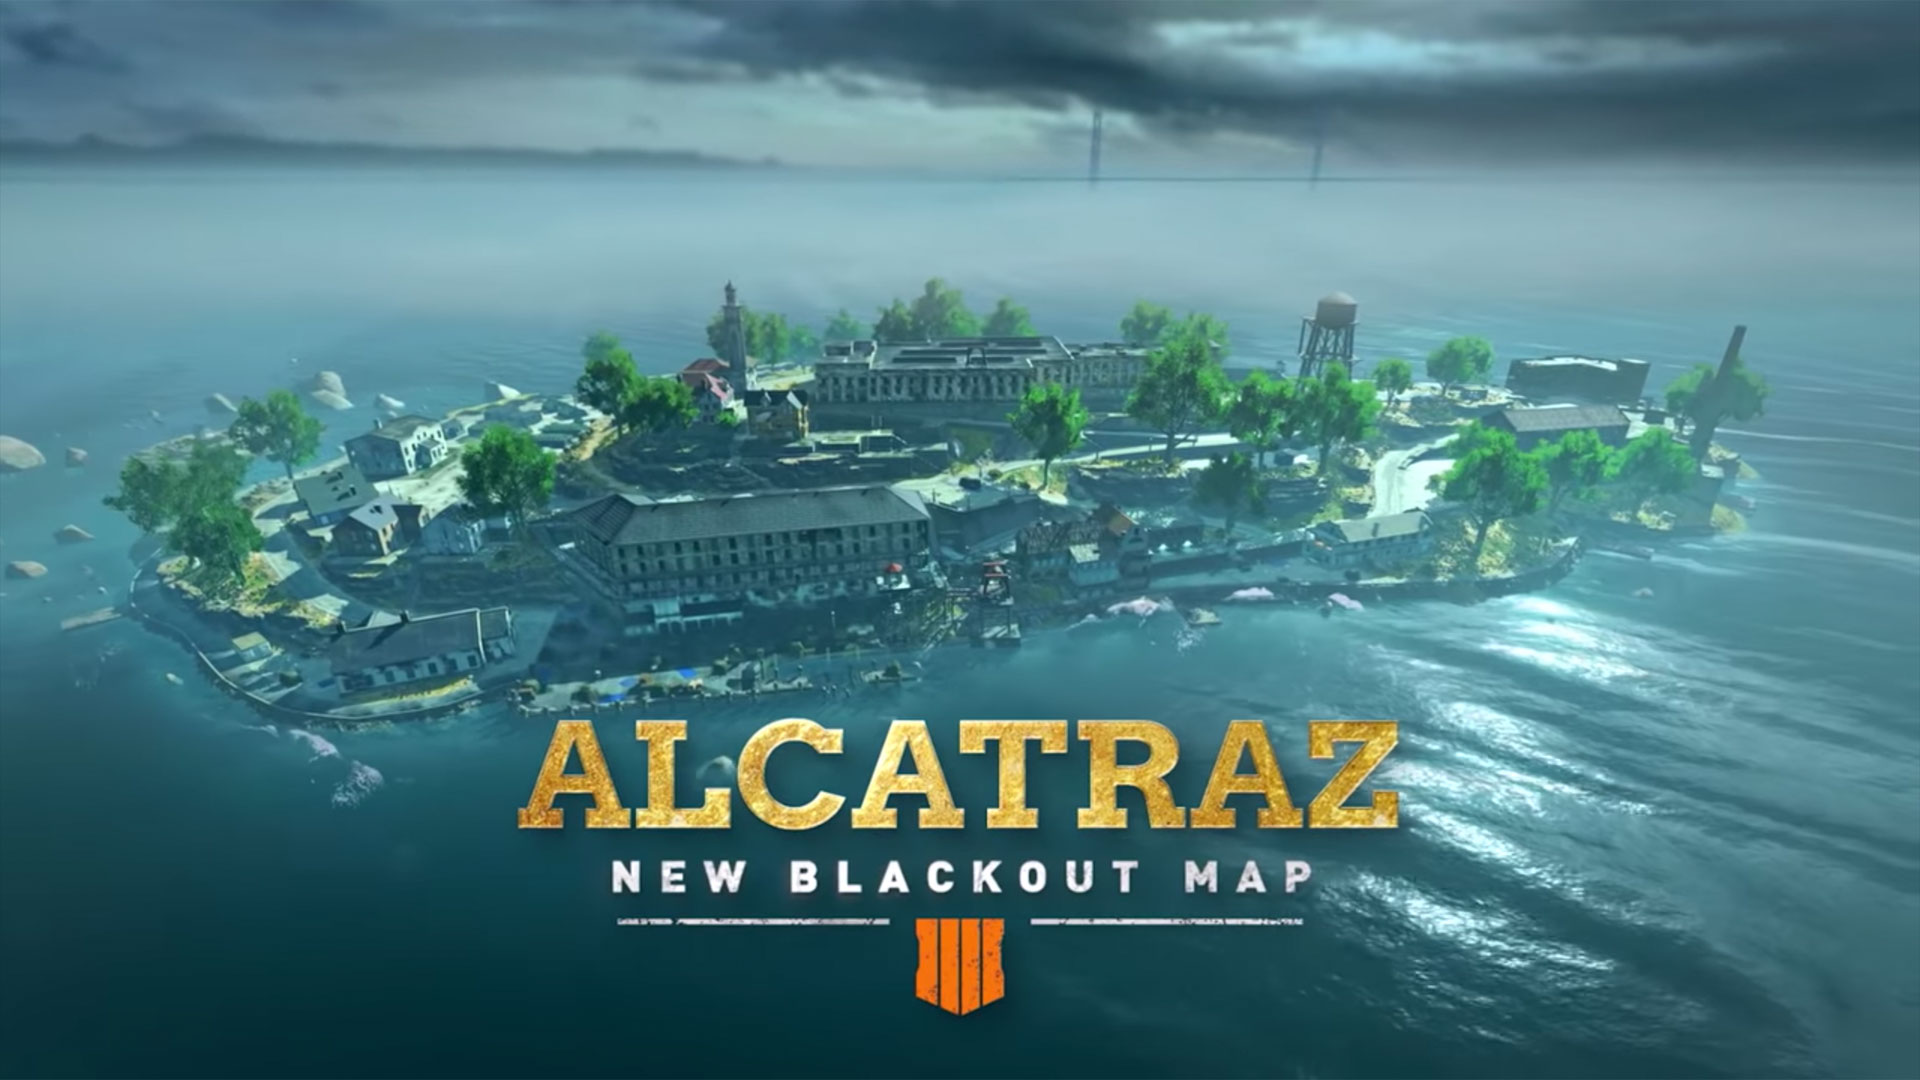 call-of-duty-black-ops-4-blackout-alcatraz-map-announced-9to5toys